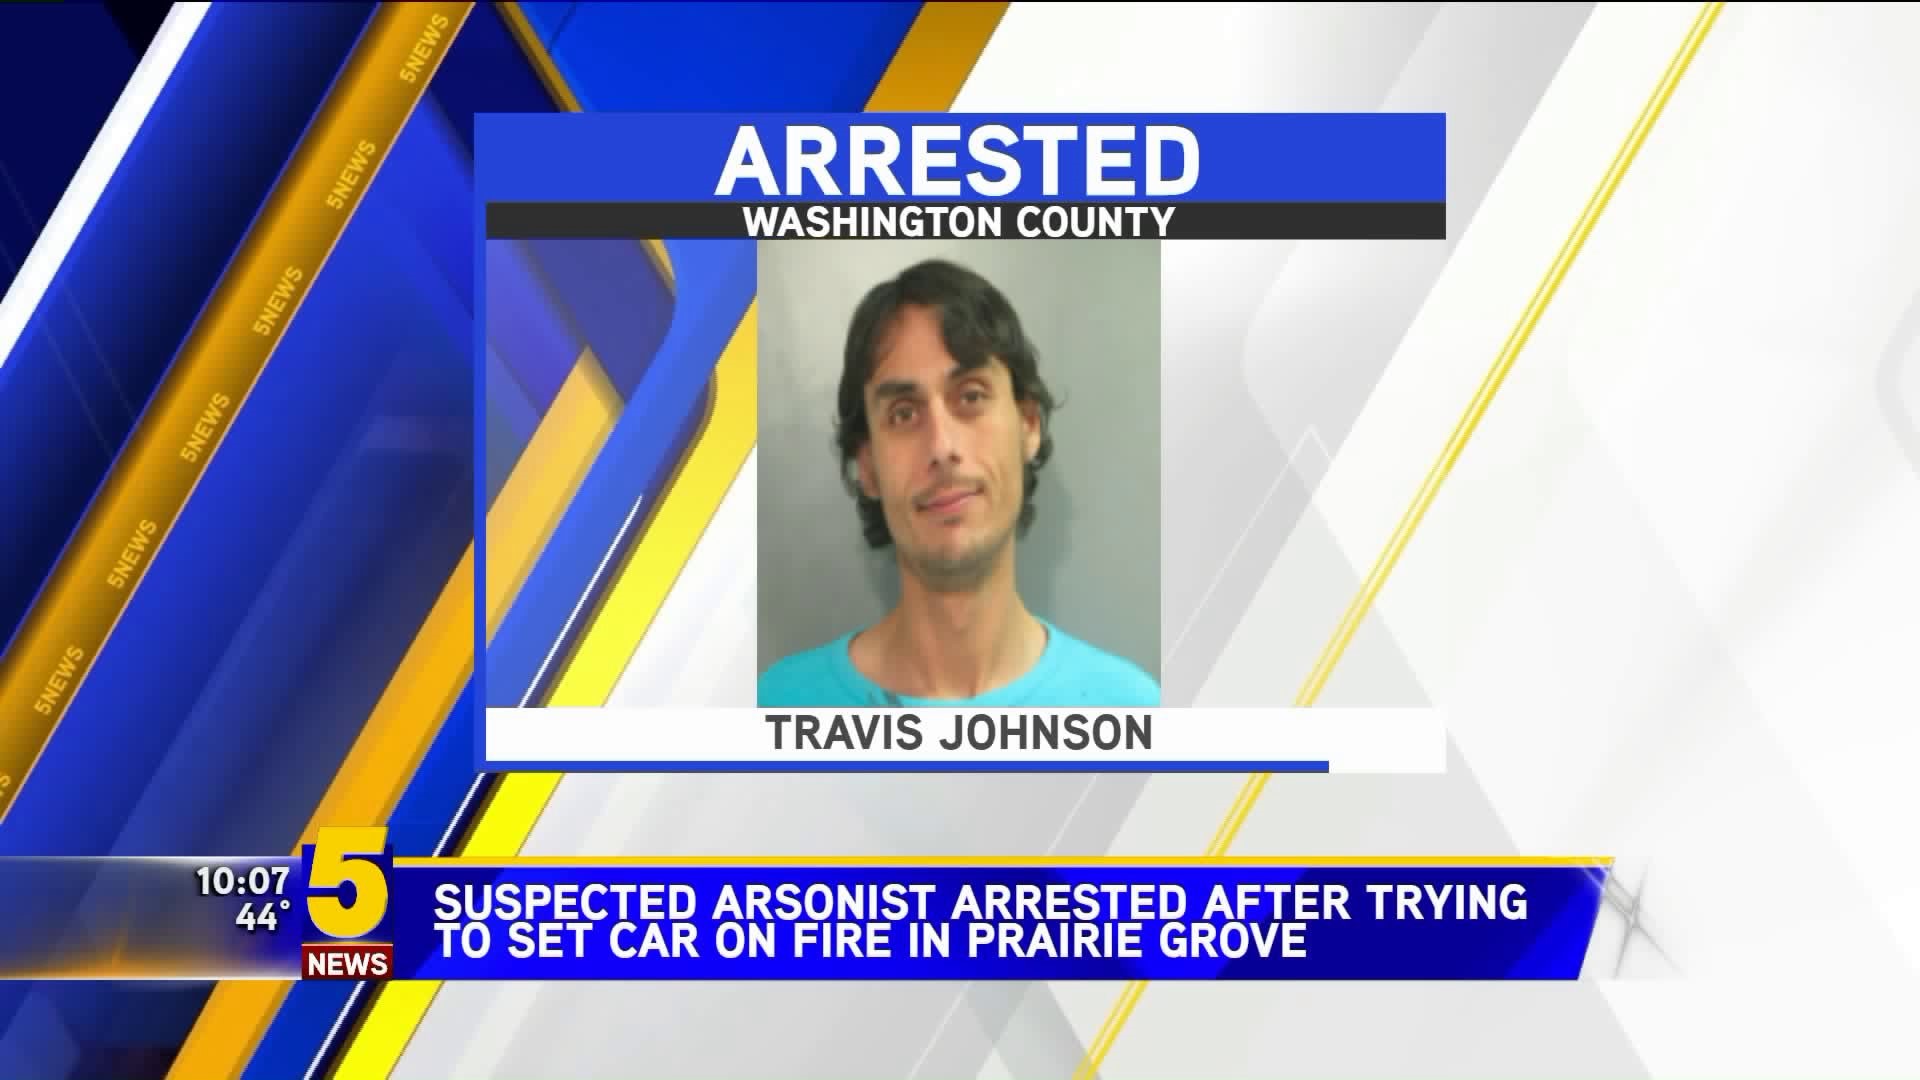 Suspected arsonist arrested after trying to set car on fire in Prairie Grove